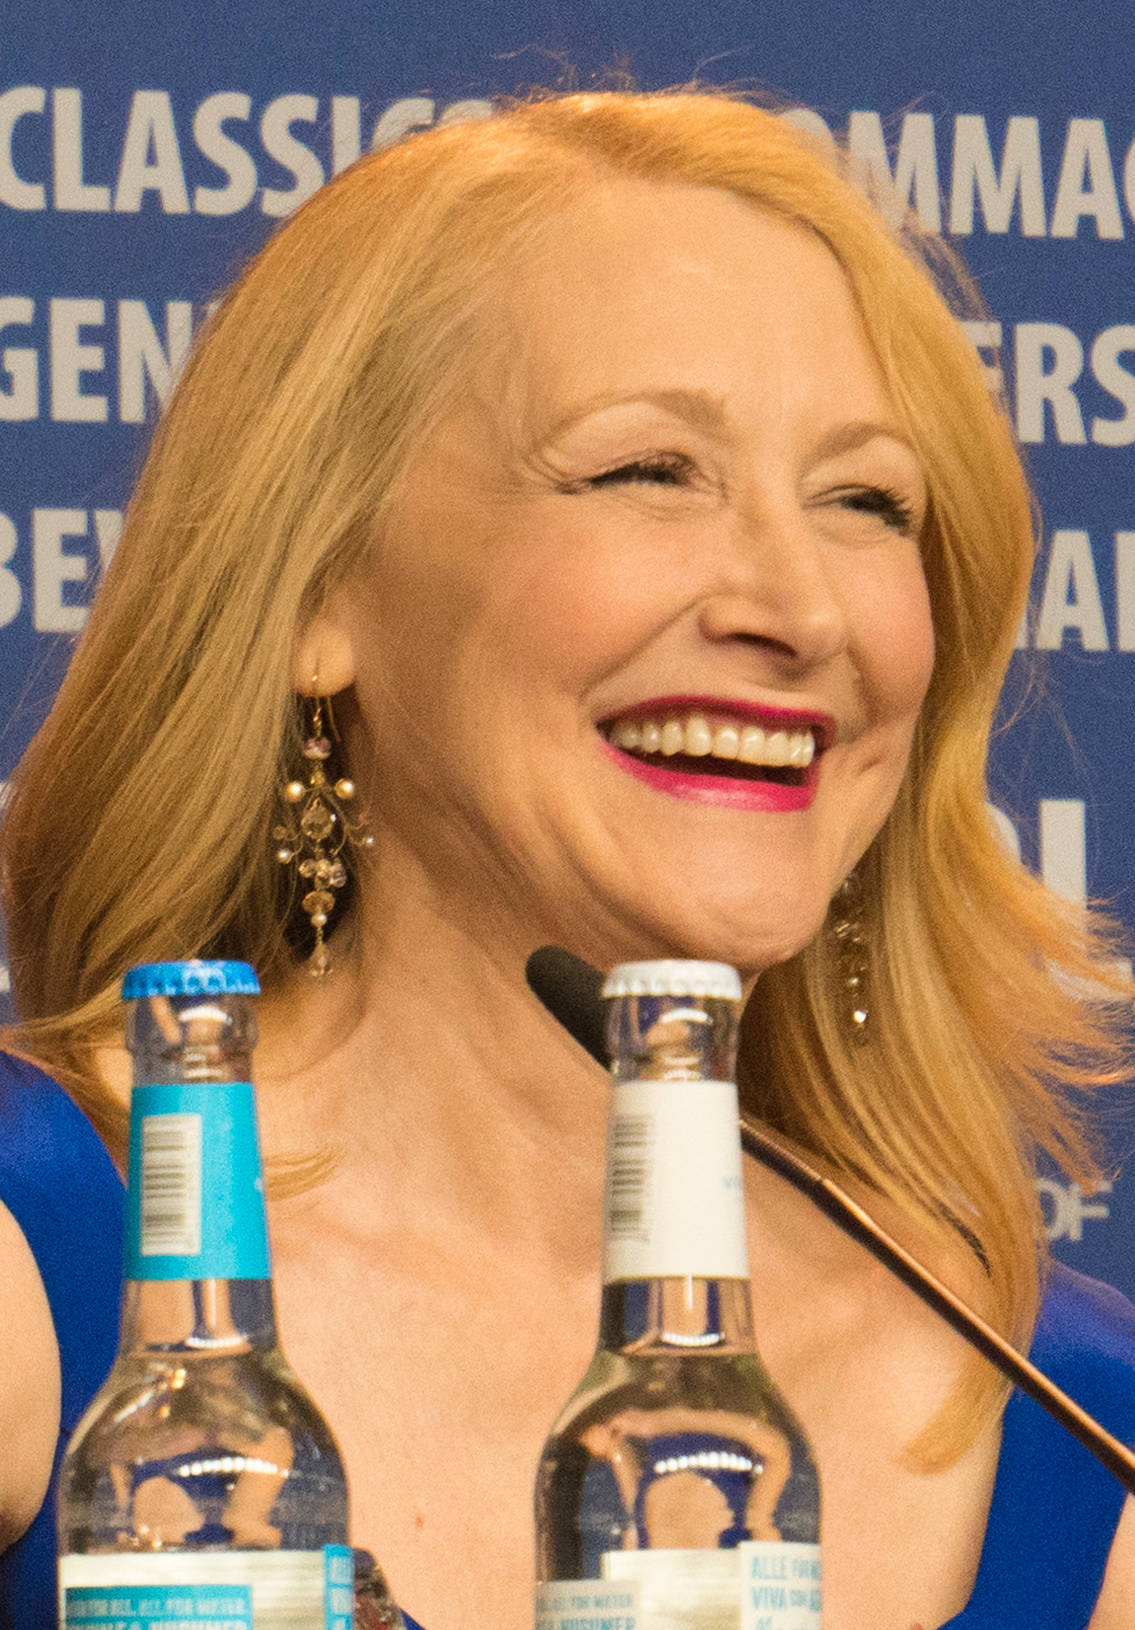 Patricia Clarkson At A Press Conference Wallpaper